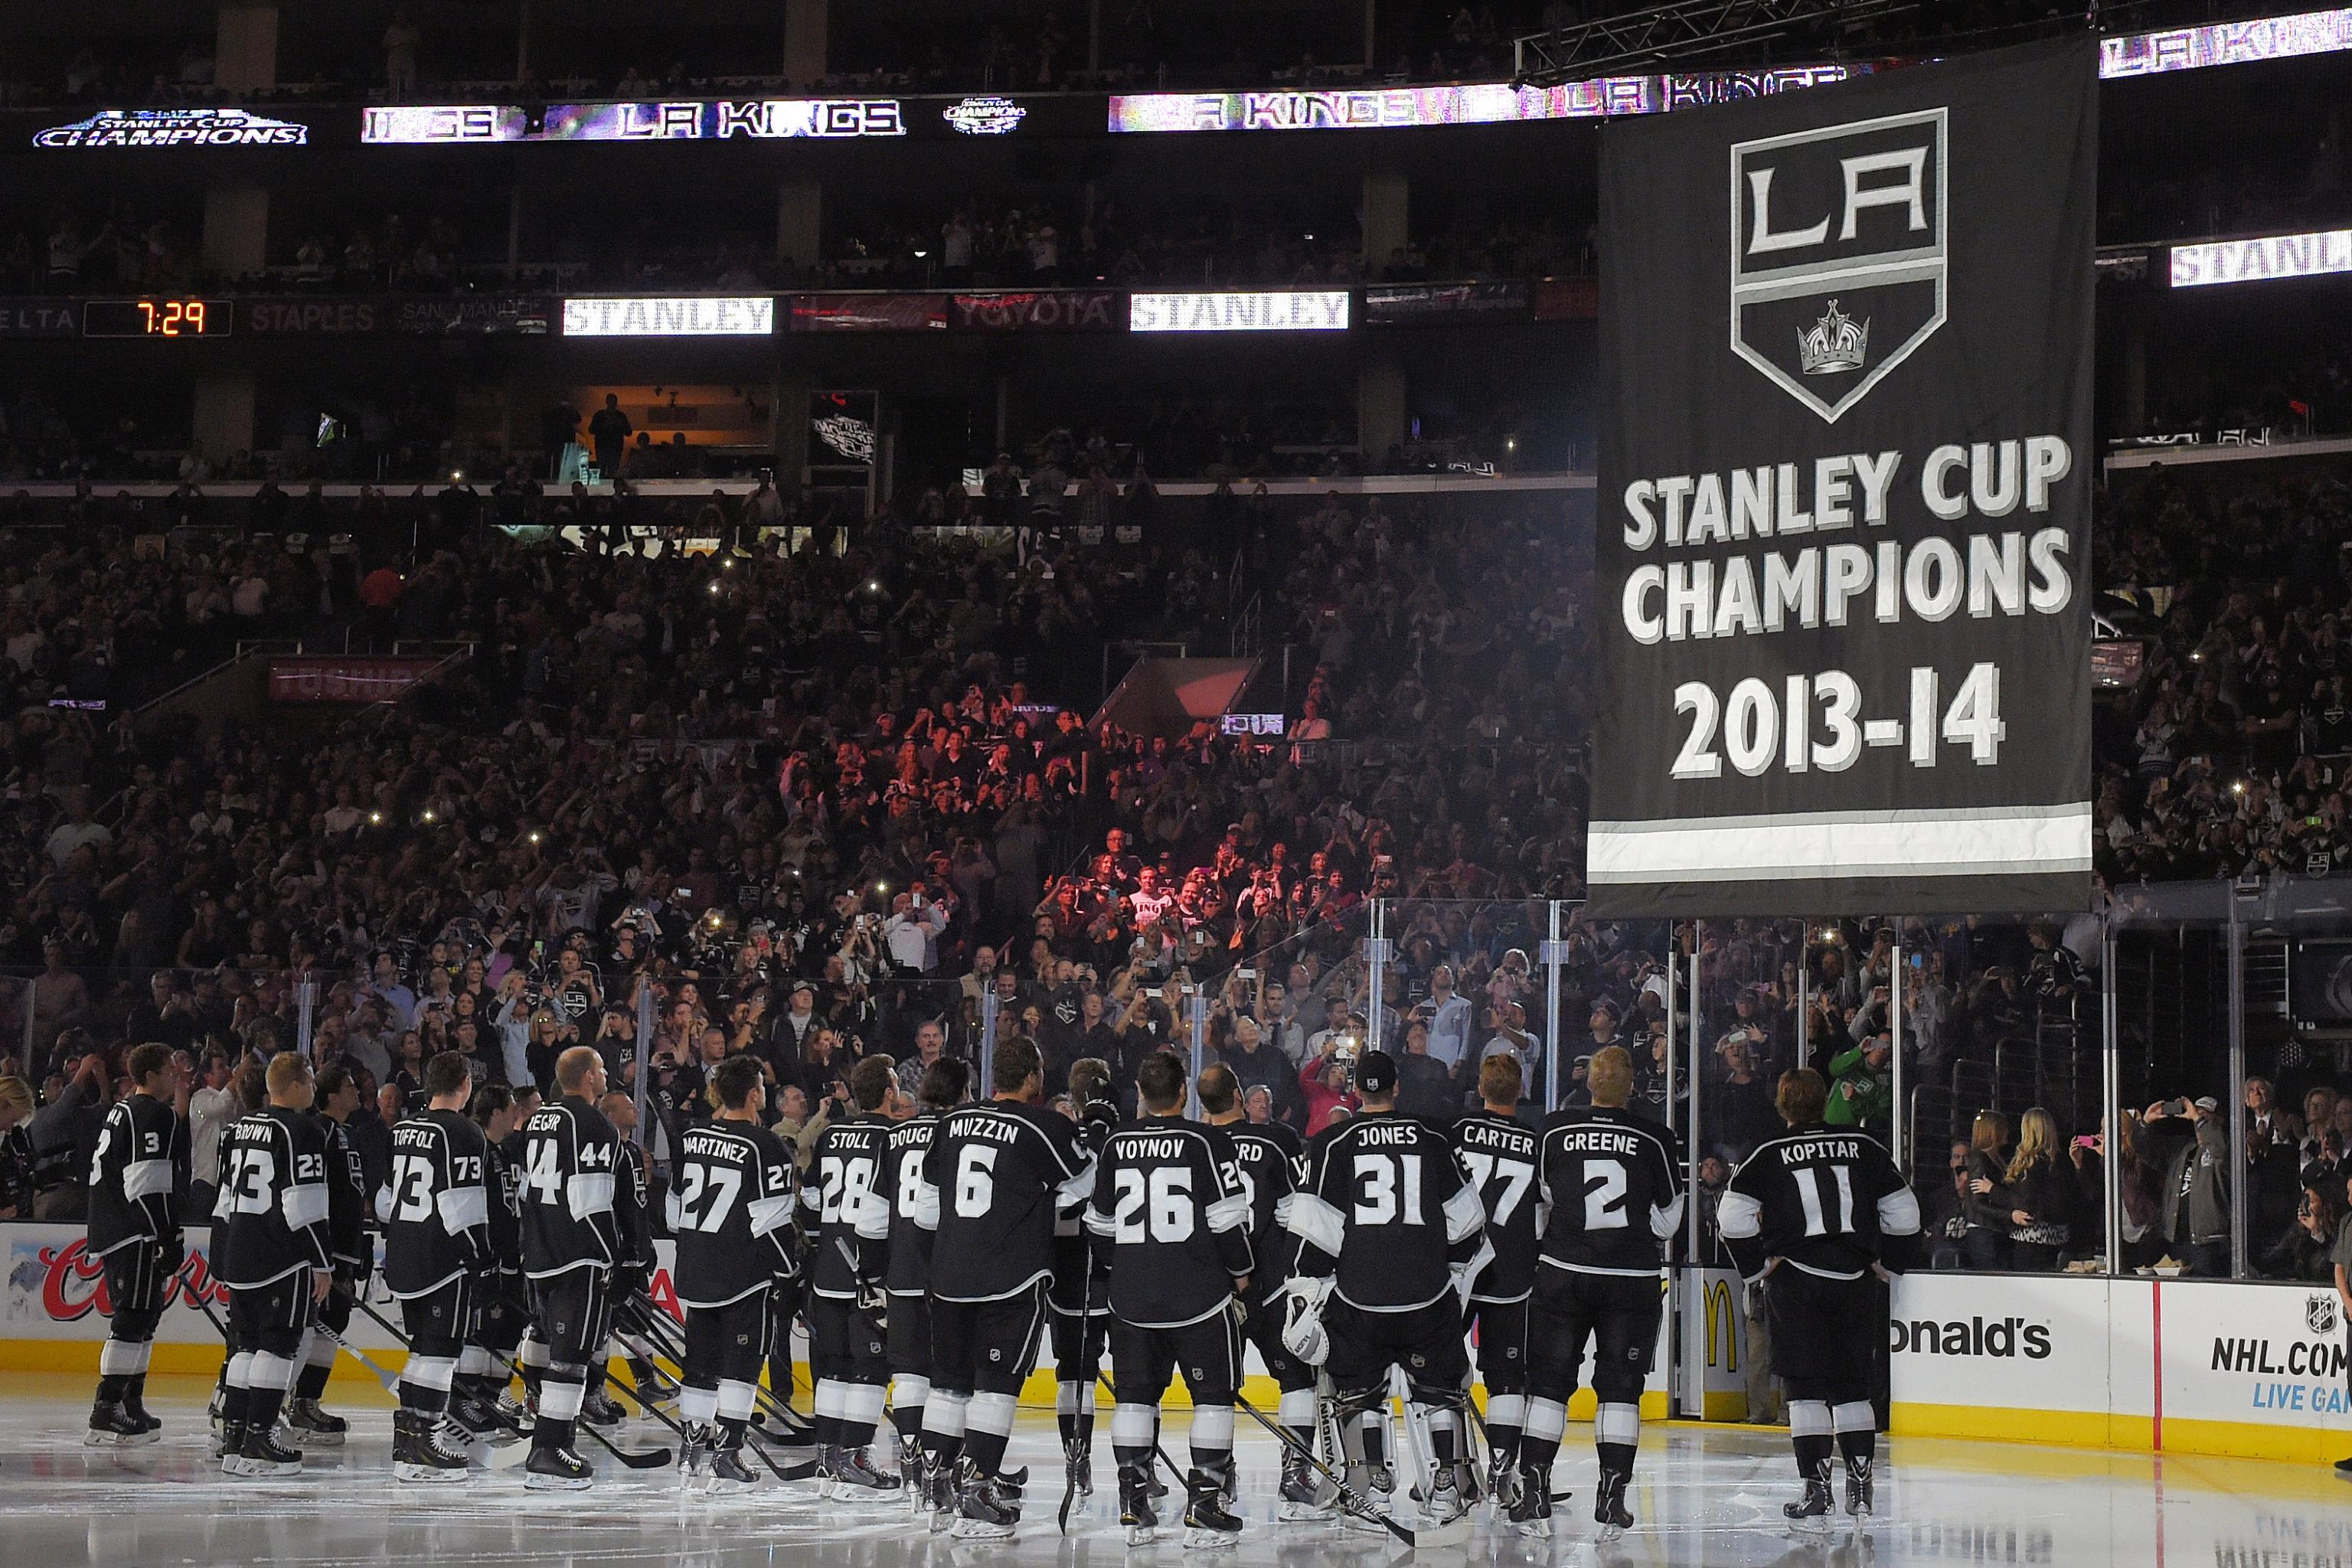 Tickets For All Kings 2014-15 Regular Season Games At Staples